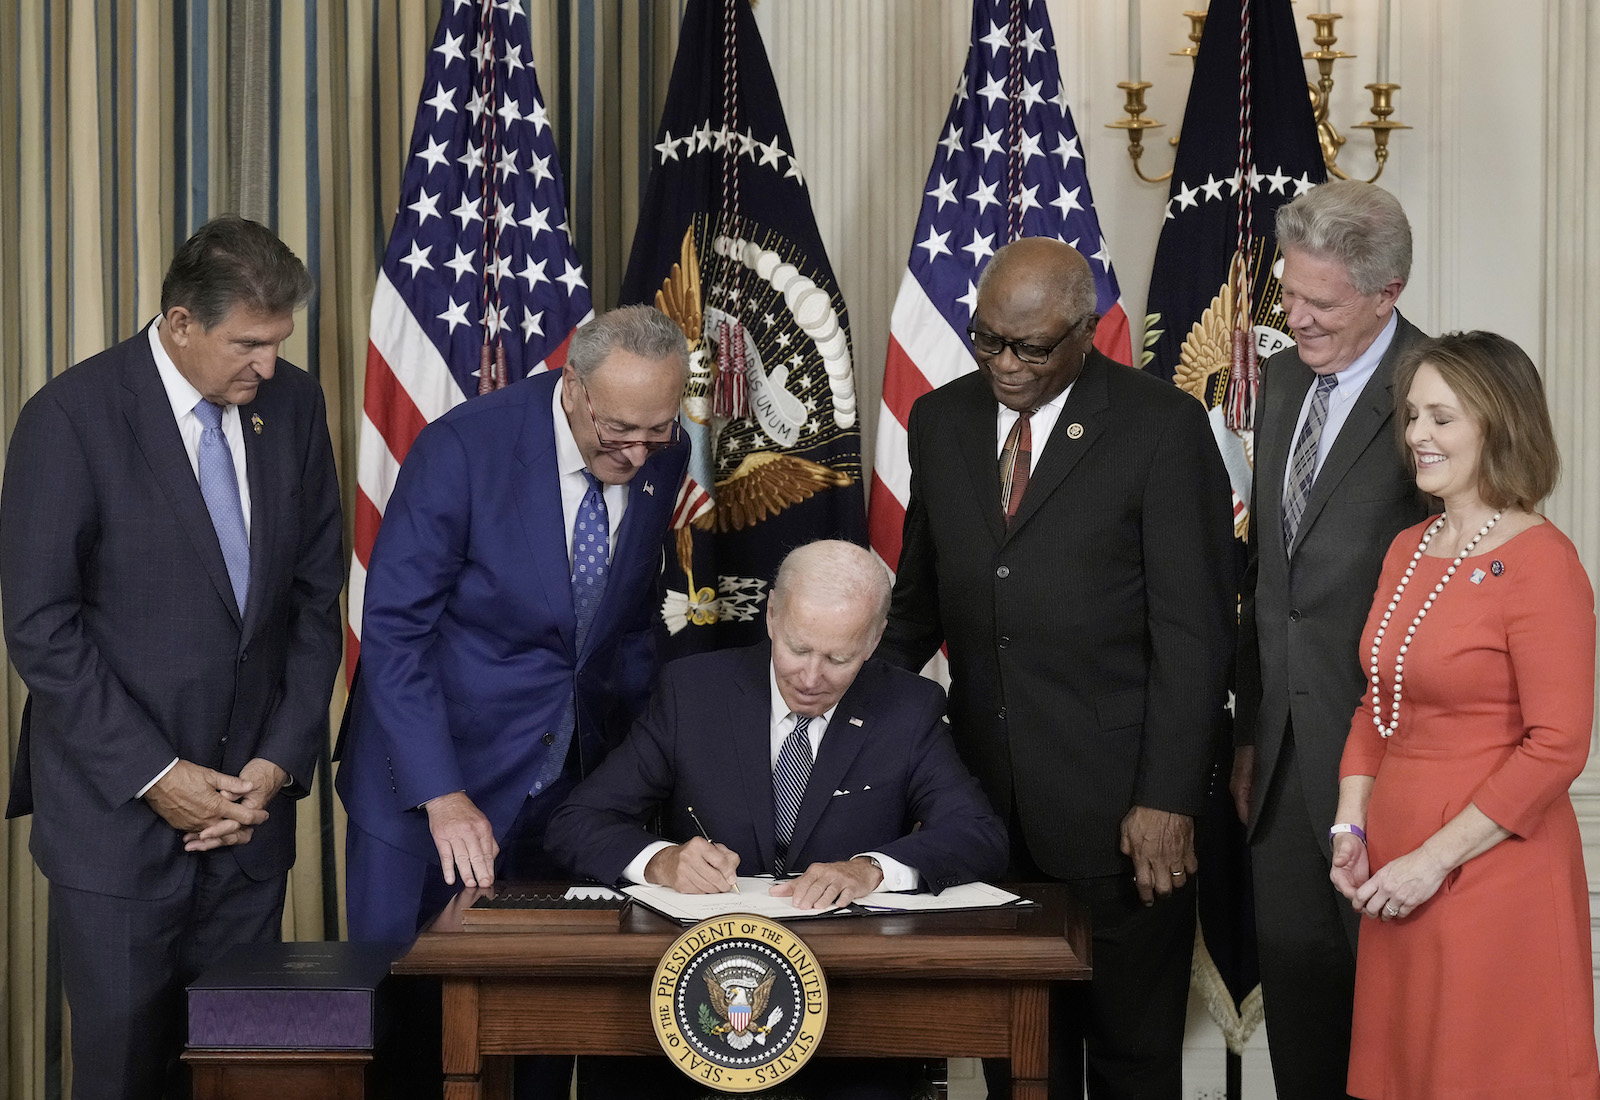 Biden signs a bill surrounded by other Democratic leaders